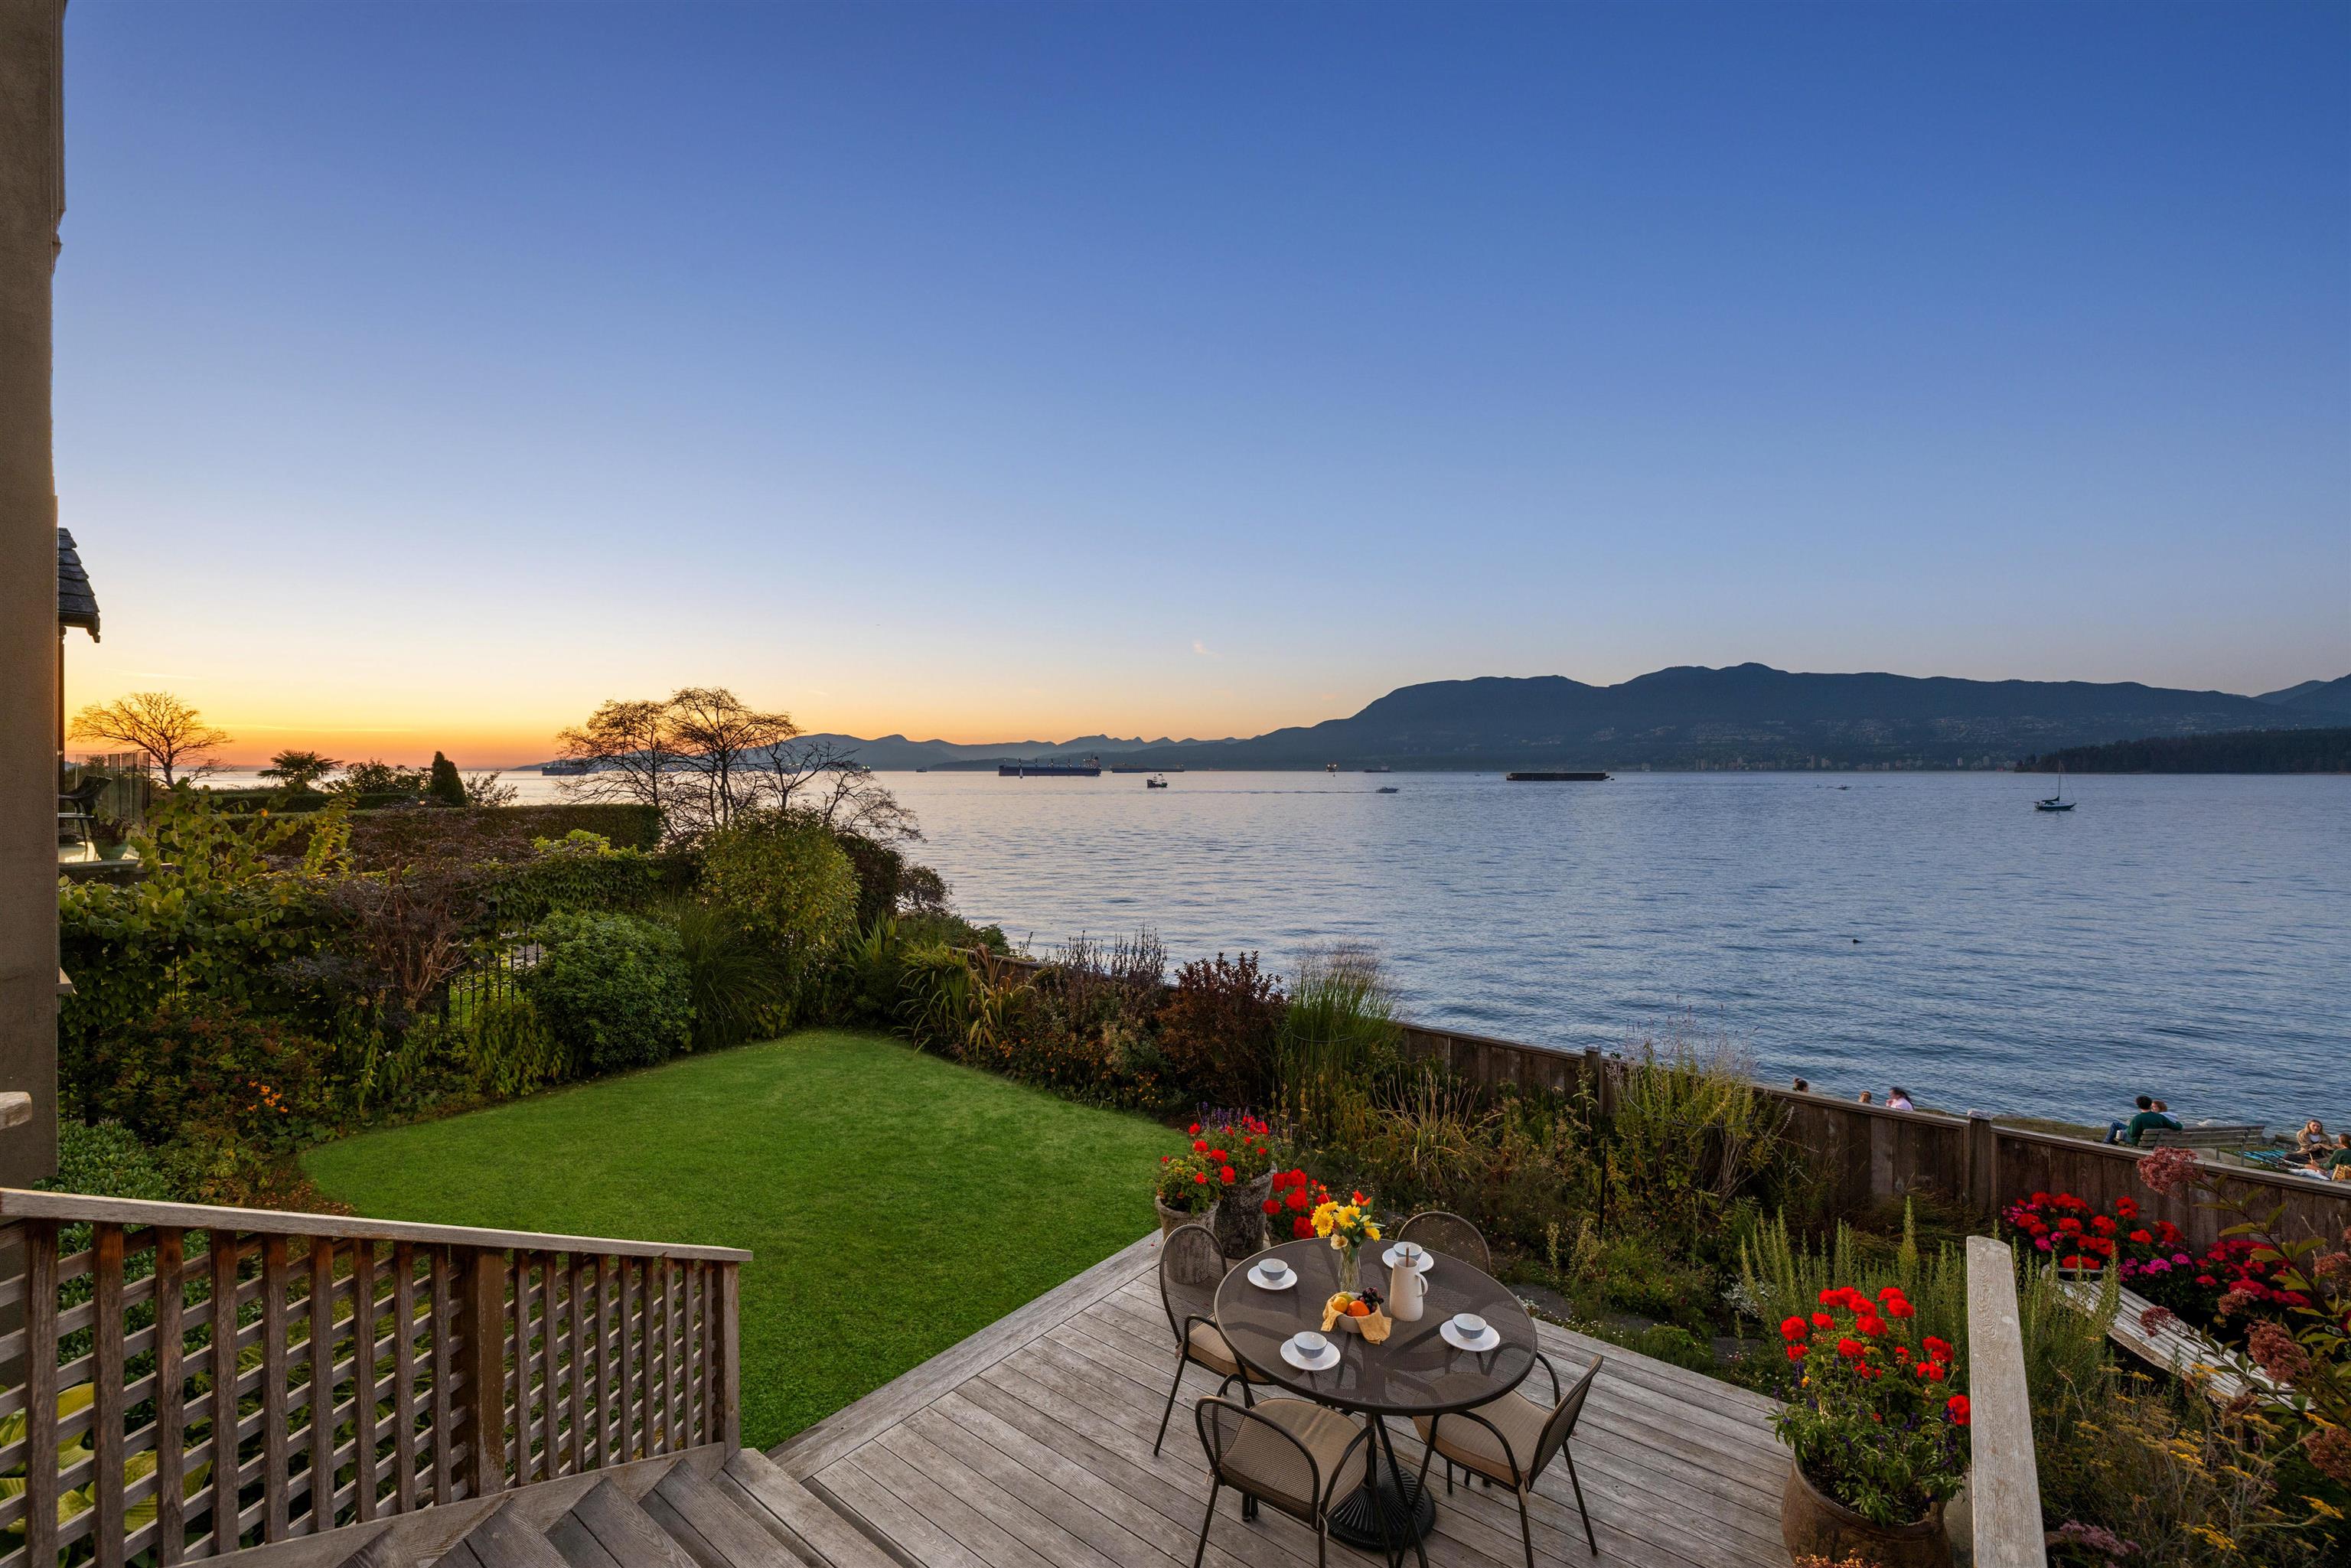 Listing image of 2487 POINT GREY ROAD